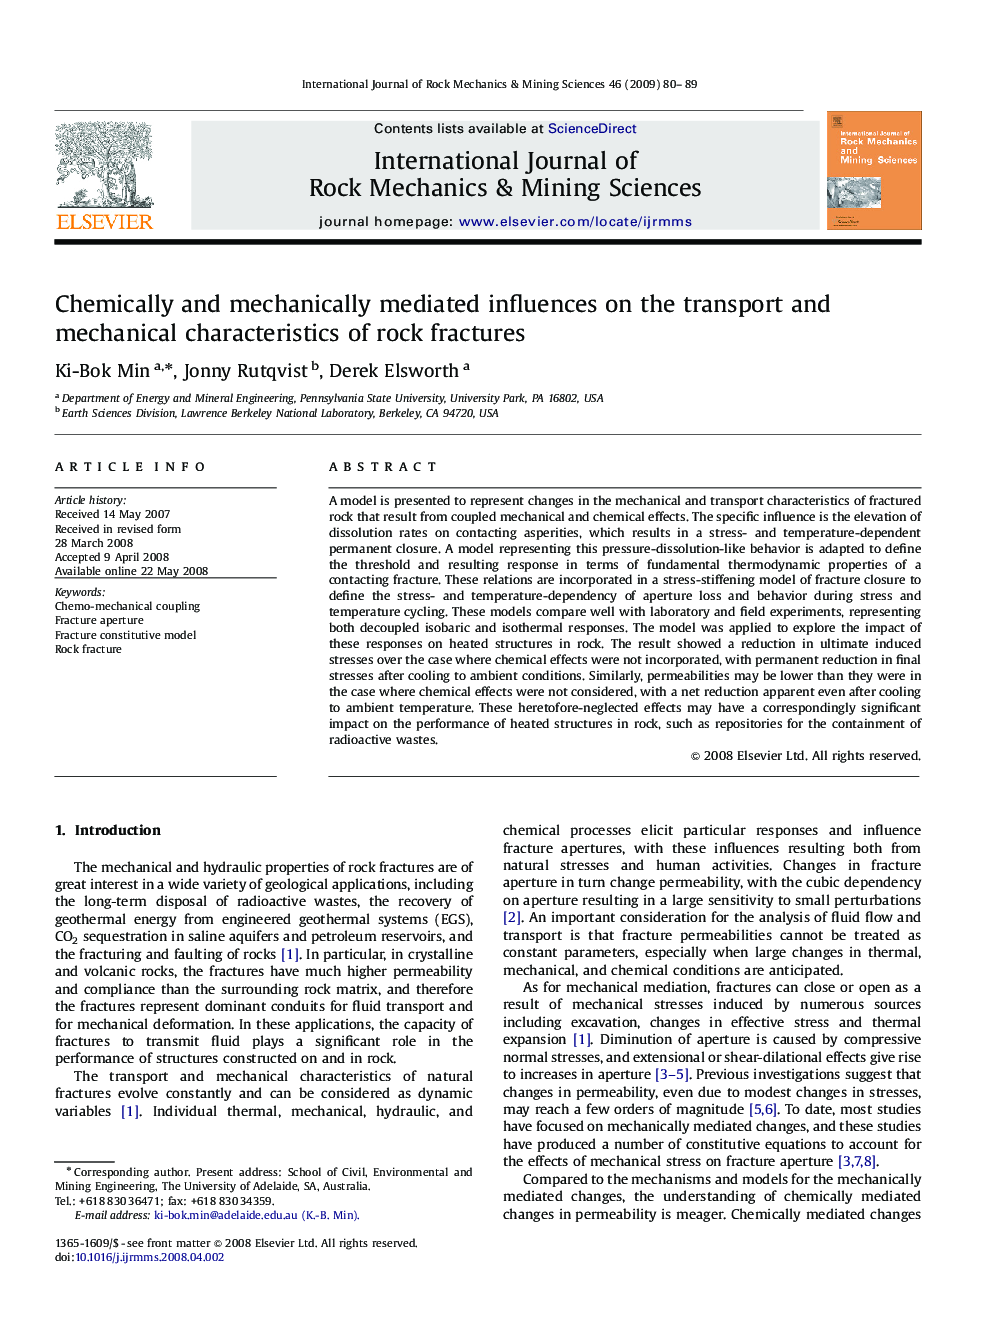 Chemically and mechanically mediated influences on the transport and mechanical characteristics of rock fractures